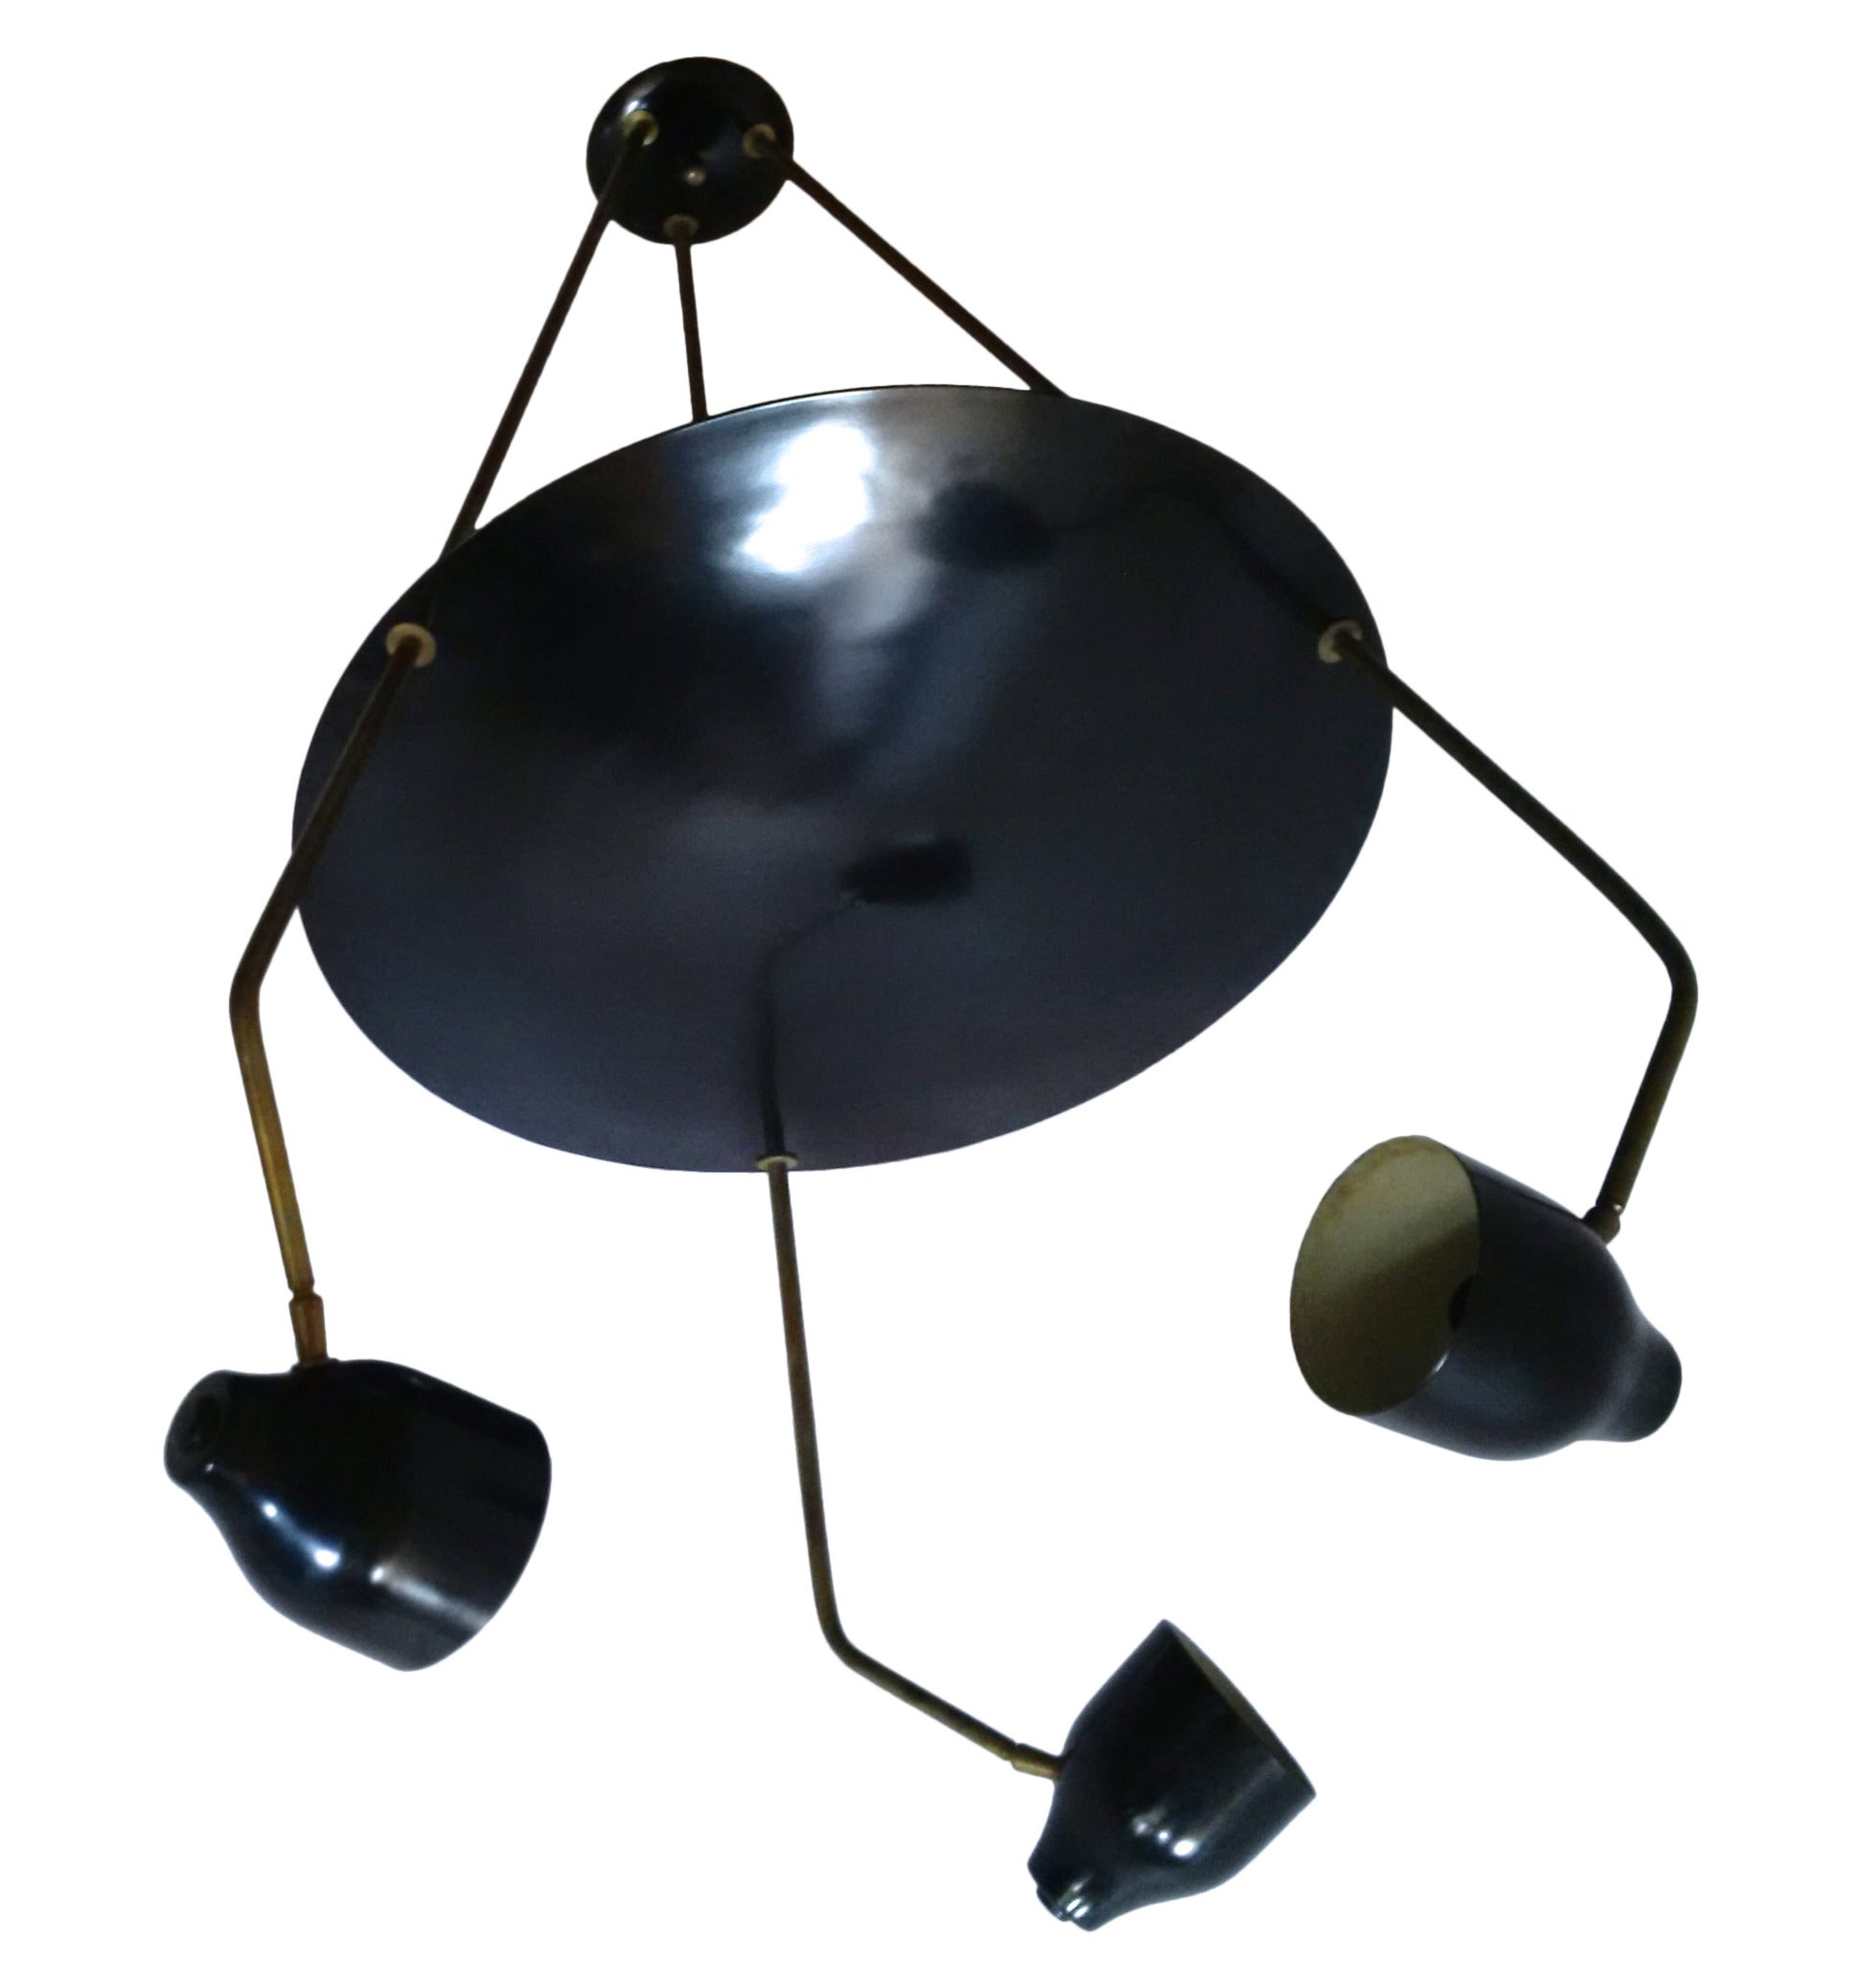 A Rare Mid Century Italian Chandelier With Sconces and UFO Disc for G.C.M.E 